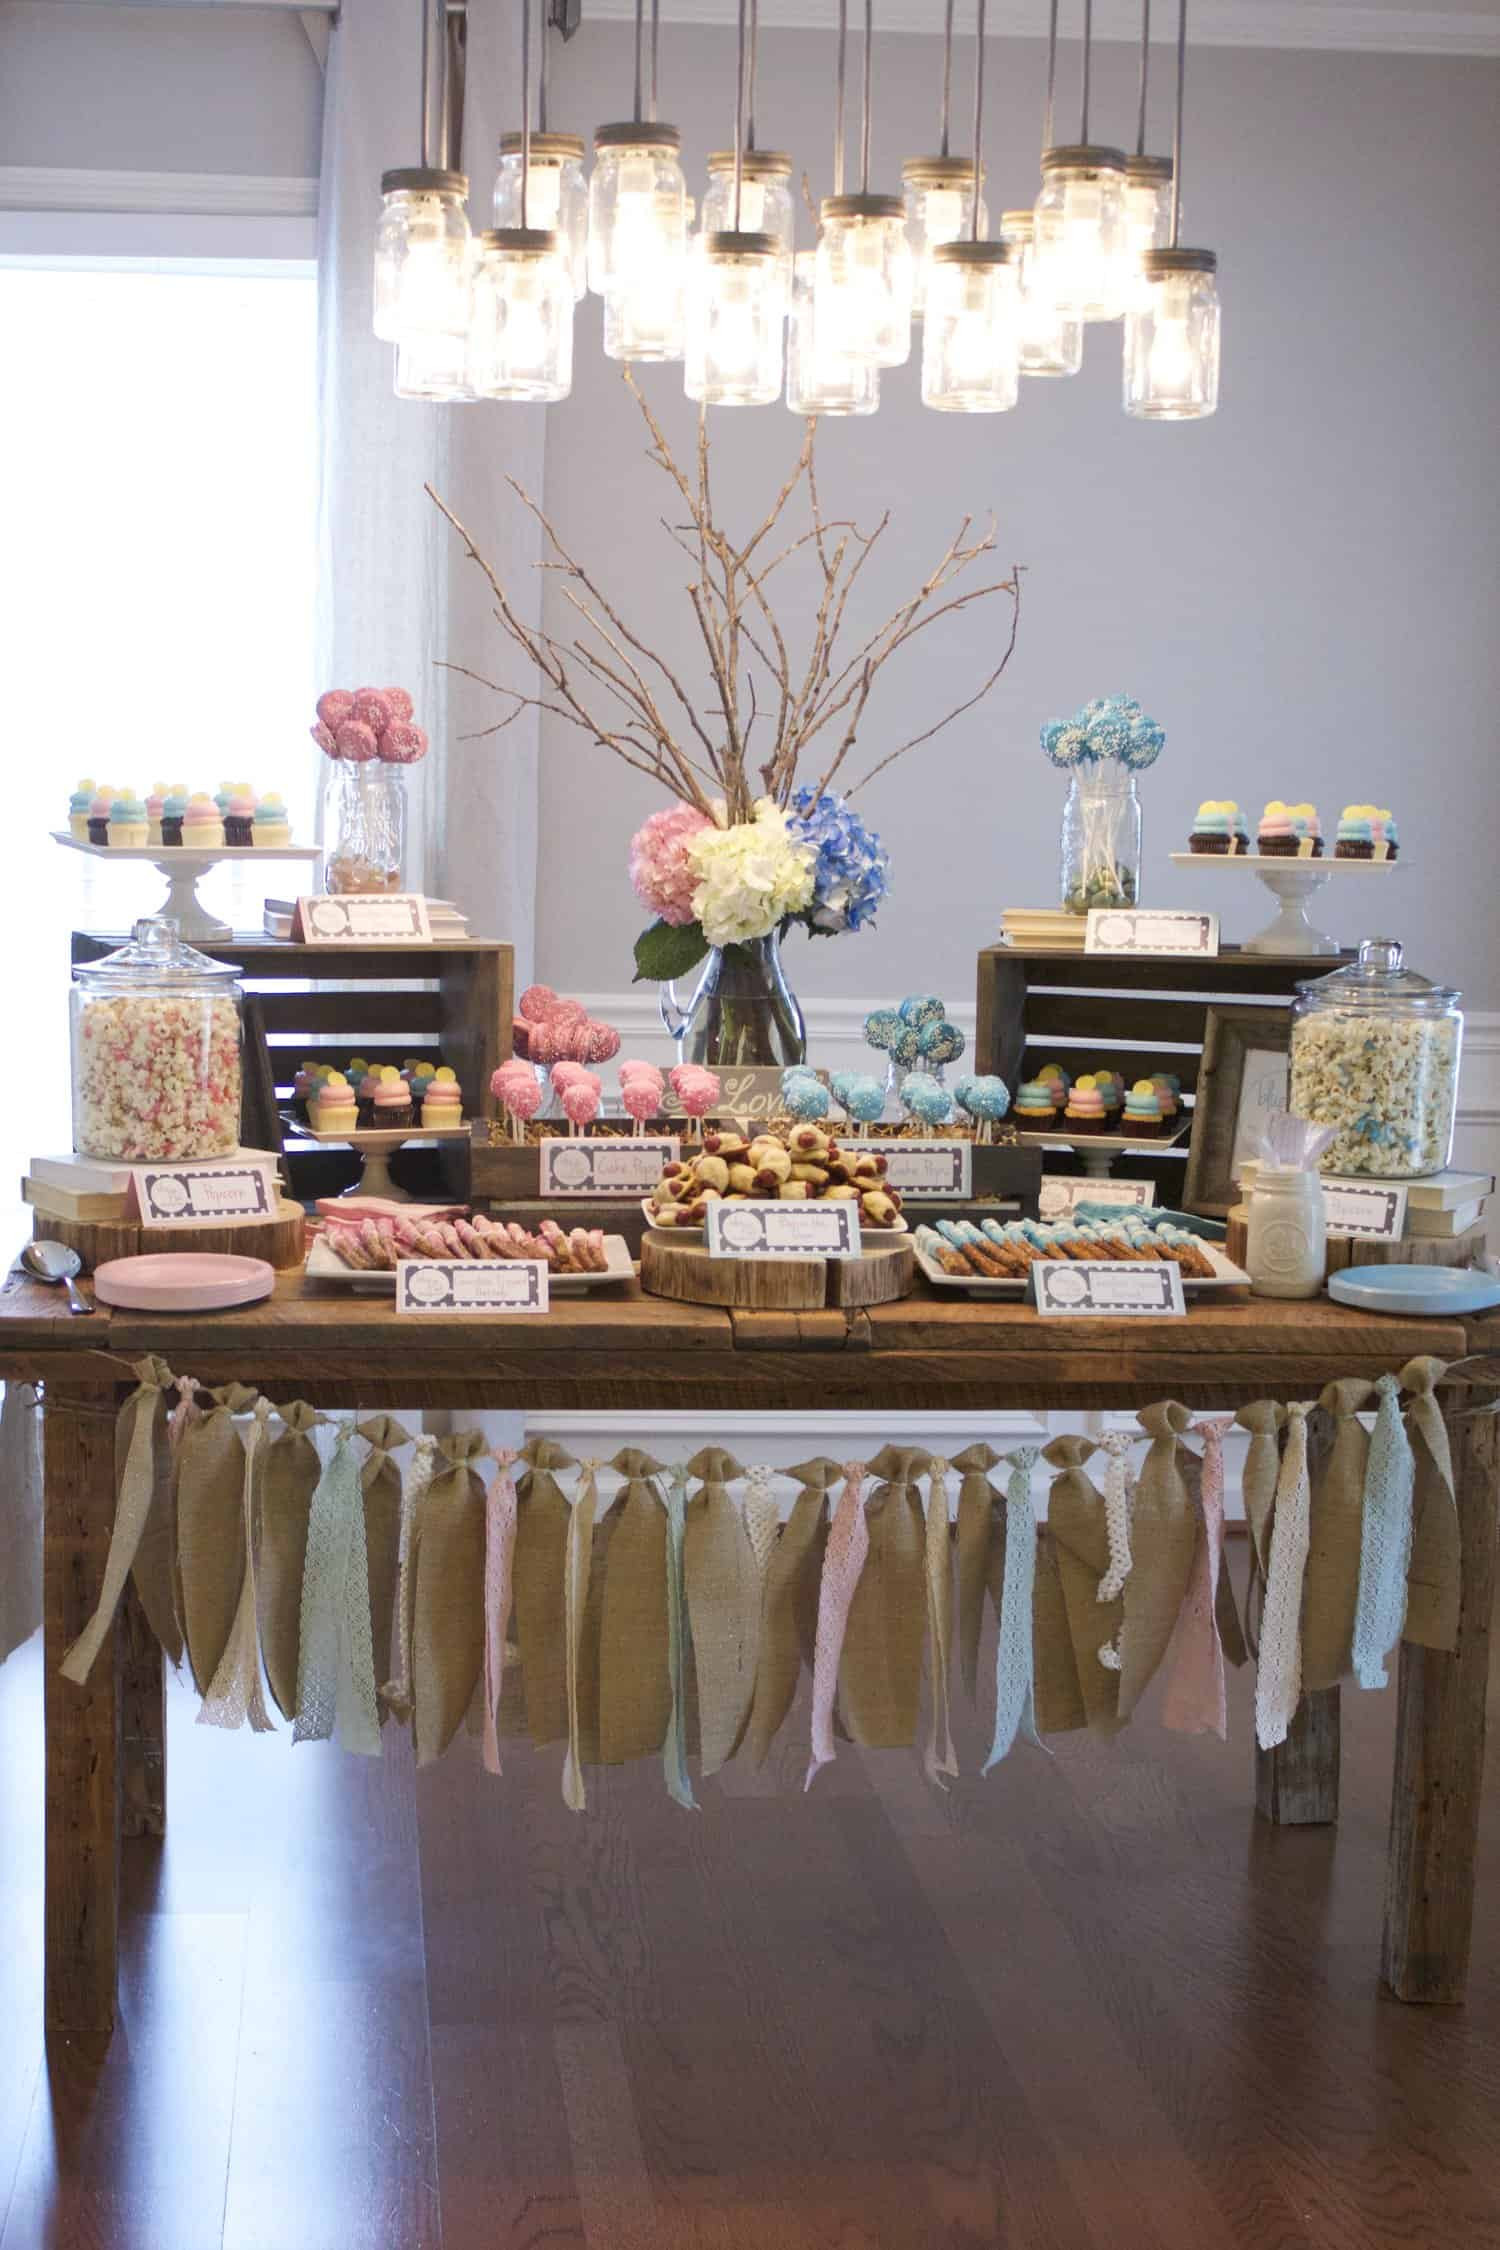 Simple Gender Reveal Party Ideas
 17 Tips To Throw An Unfor table Gender Reveal Party